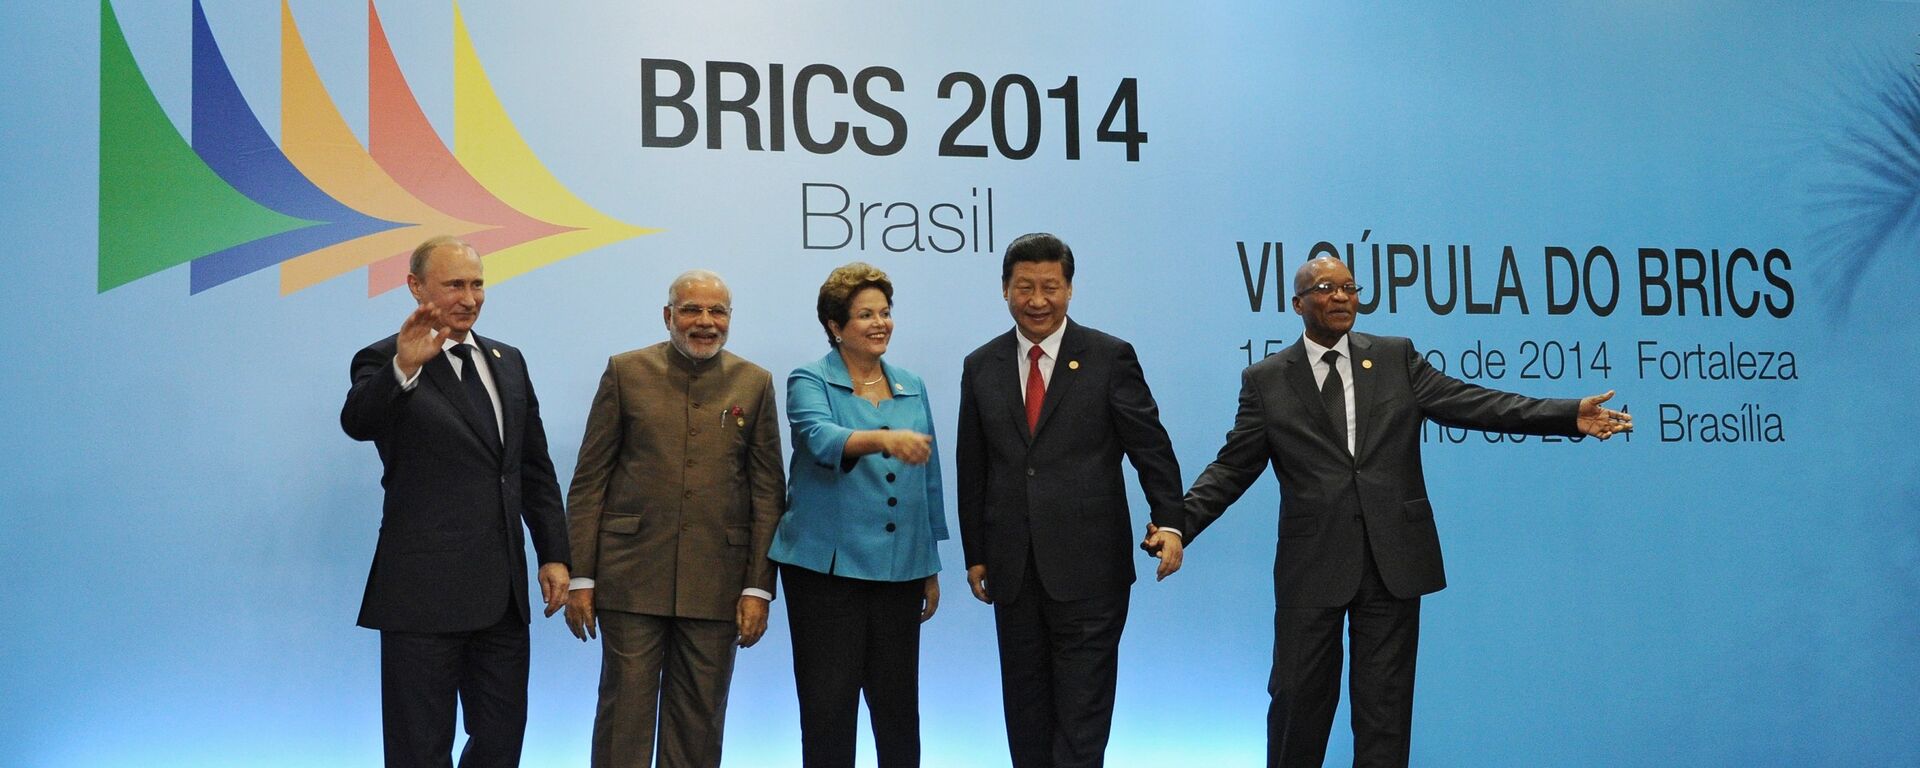 On July 15, 2014, BRICS leaders -- Russian President Vladimir Putin, Indian Prime Minister Narendra Modi, Brazilian President Dilma Rousseff, Chinese President Xi Jinping and South African President Jacob Zuma (from left to right) -- pose for a group photo in the Congress Center in Fortaleza. - Sputnik International, 1920, 26.05.2015